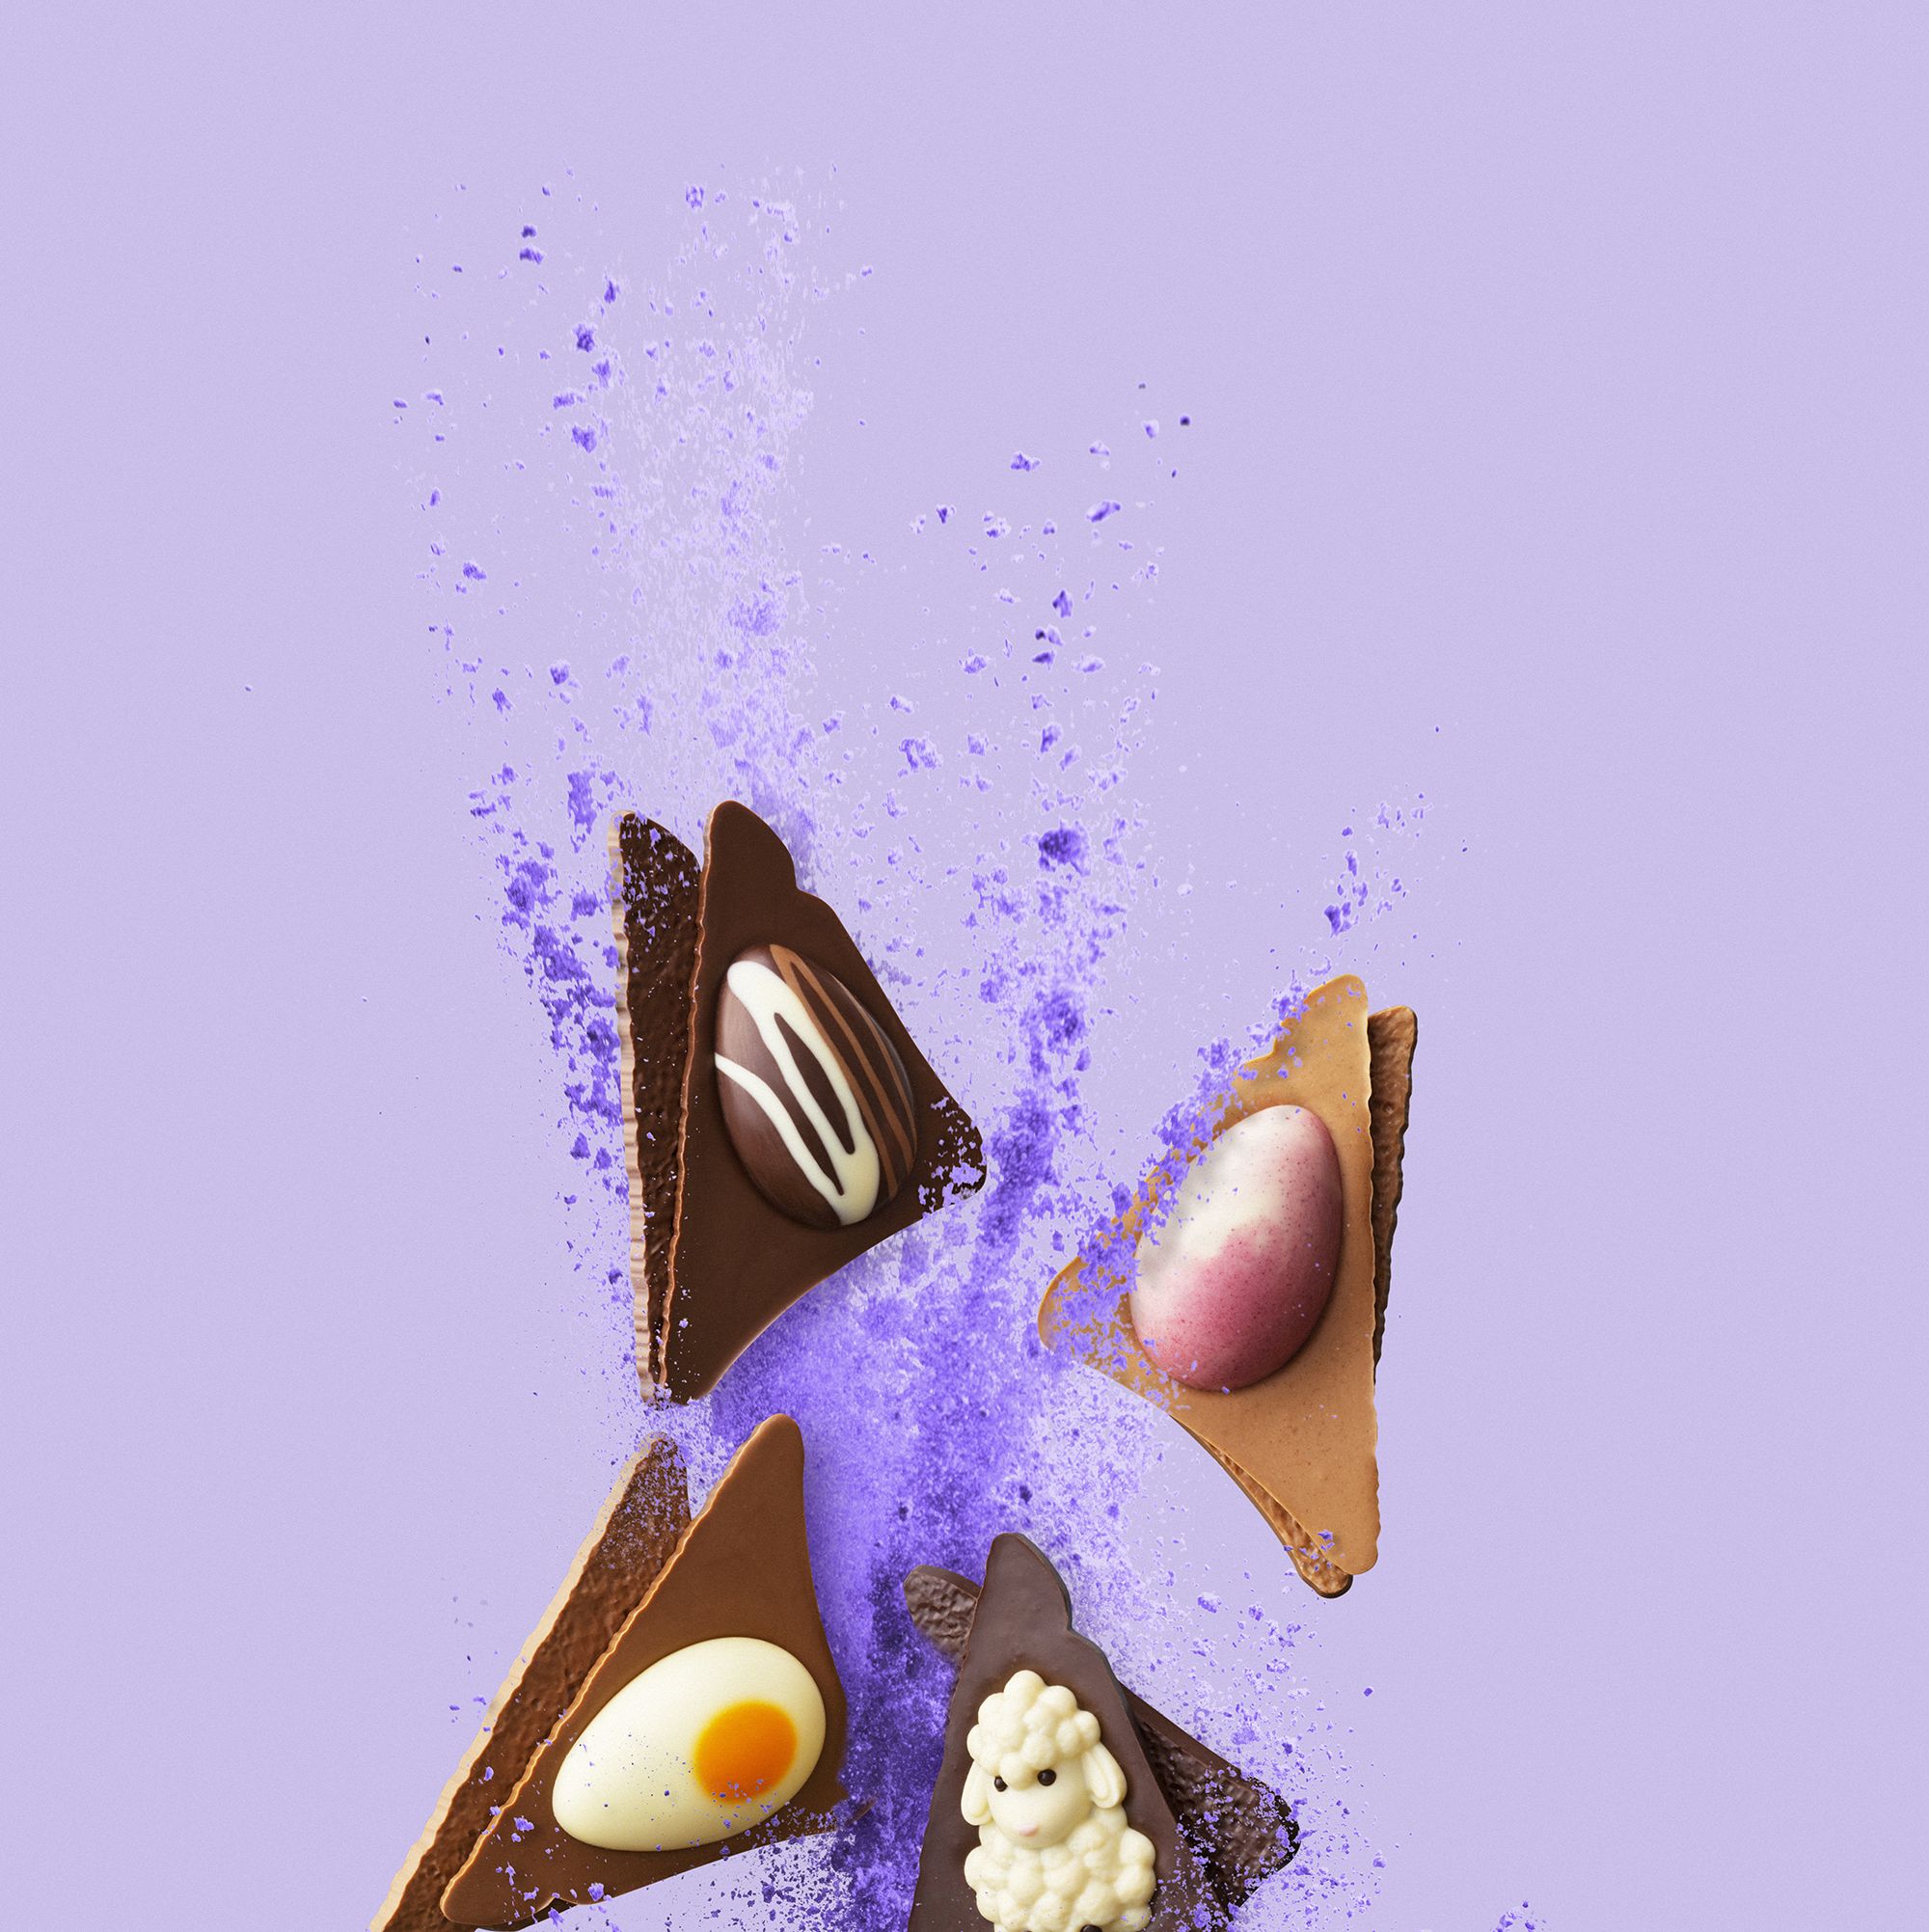 Hotel Chocolat easter egg sandwiches